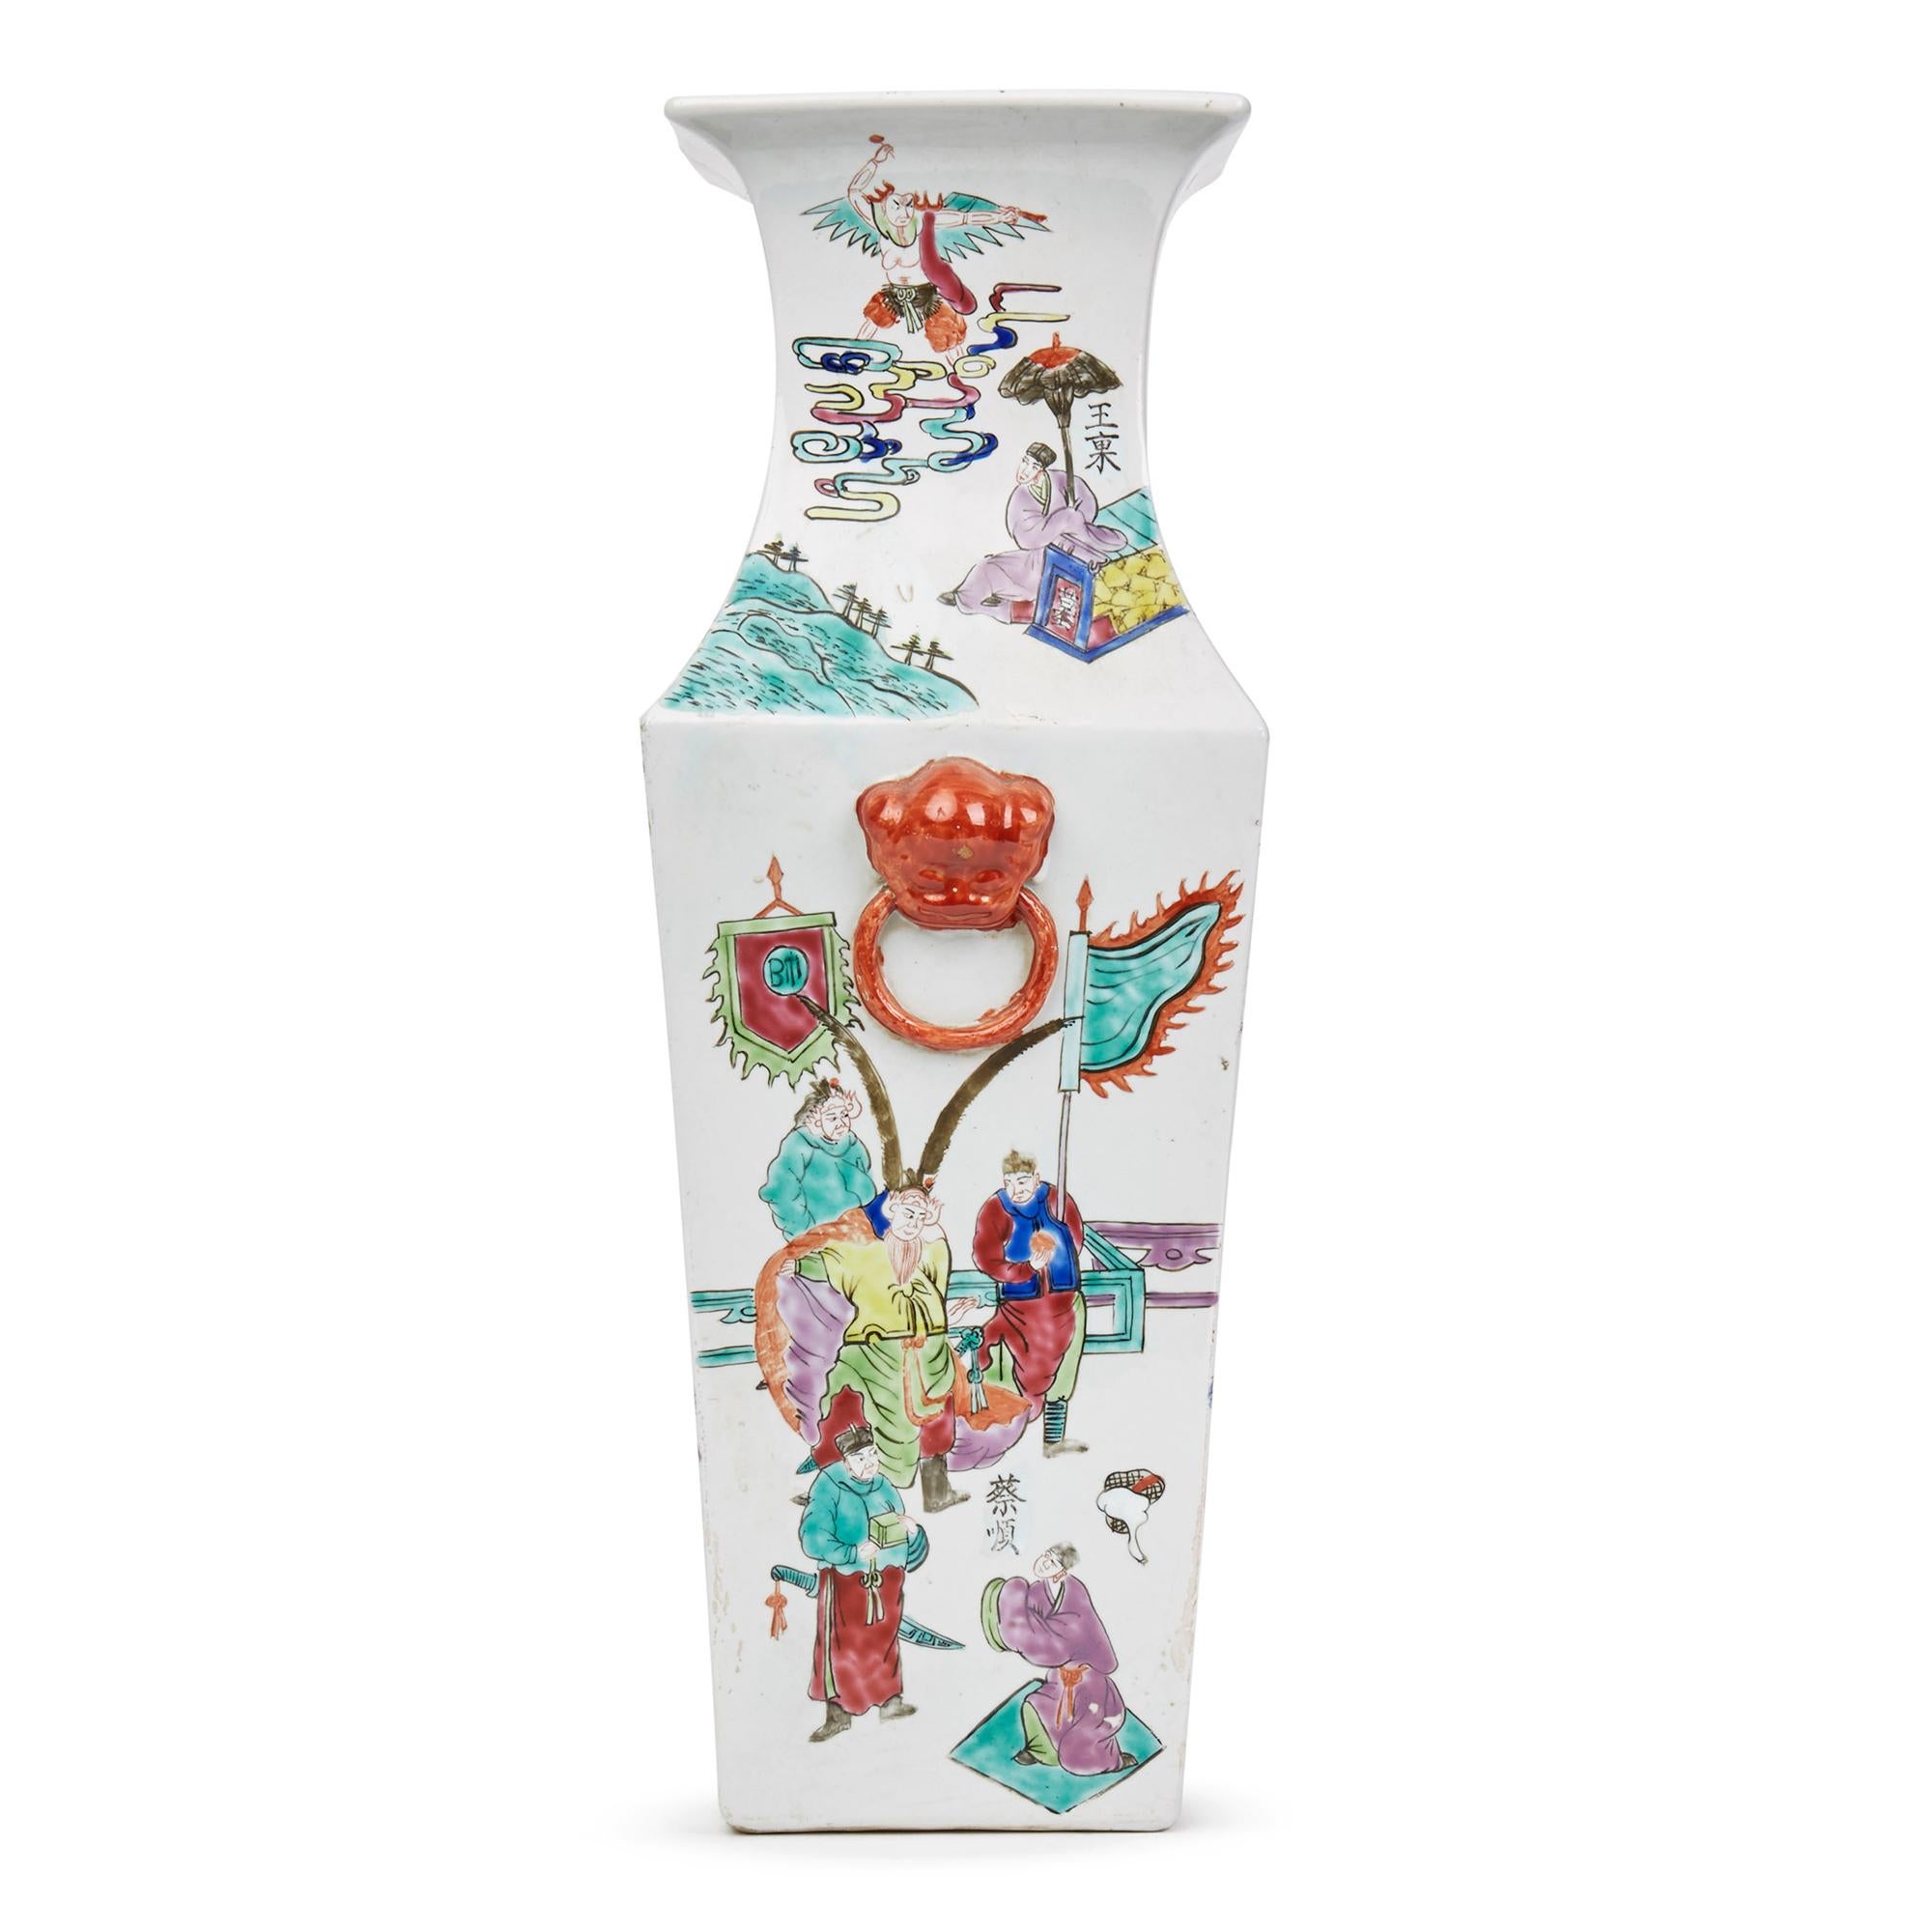 A fine antique/vintage Chinese porcelain square form vase hand decorated with various scenes in the famille rose palette with dog and ring handles applied to the side. The four sided tall vase has a shaped top with each panel painted with a figural